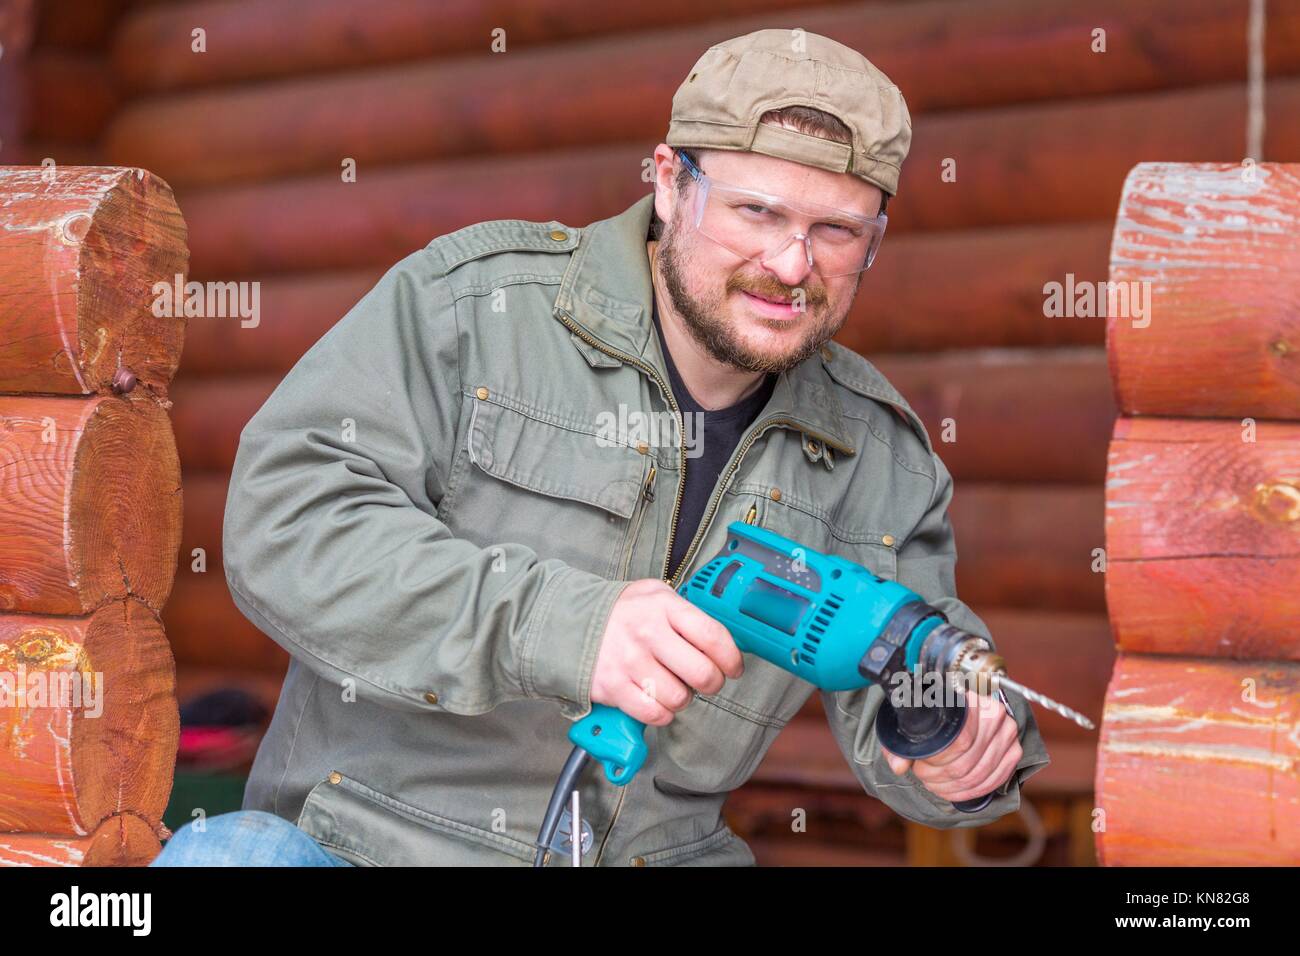 Worker with a drill in safety glasses working in a wooden cottage. Stock Photo